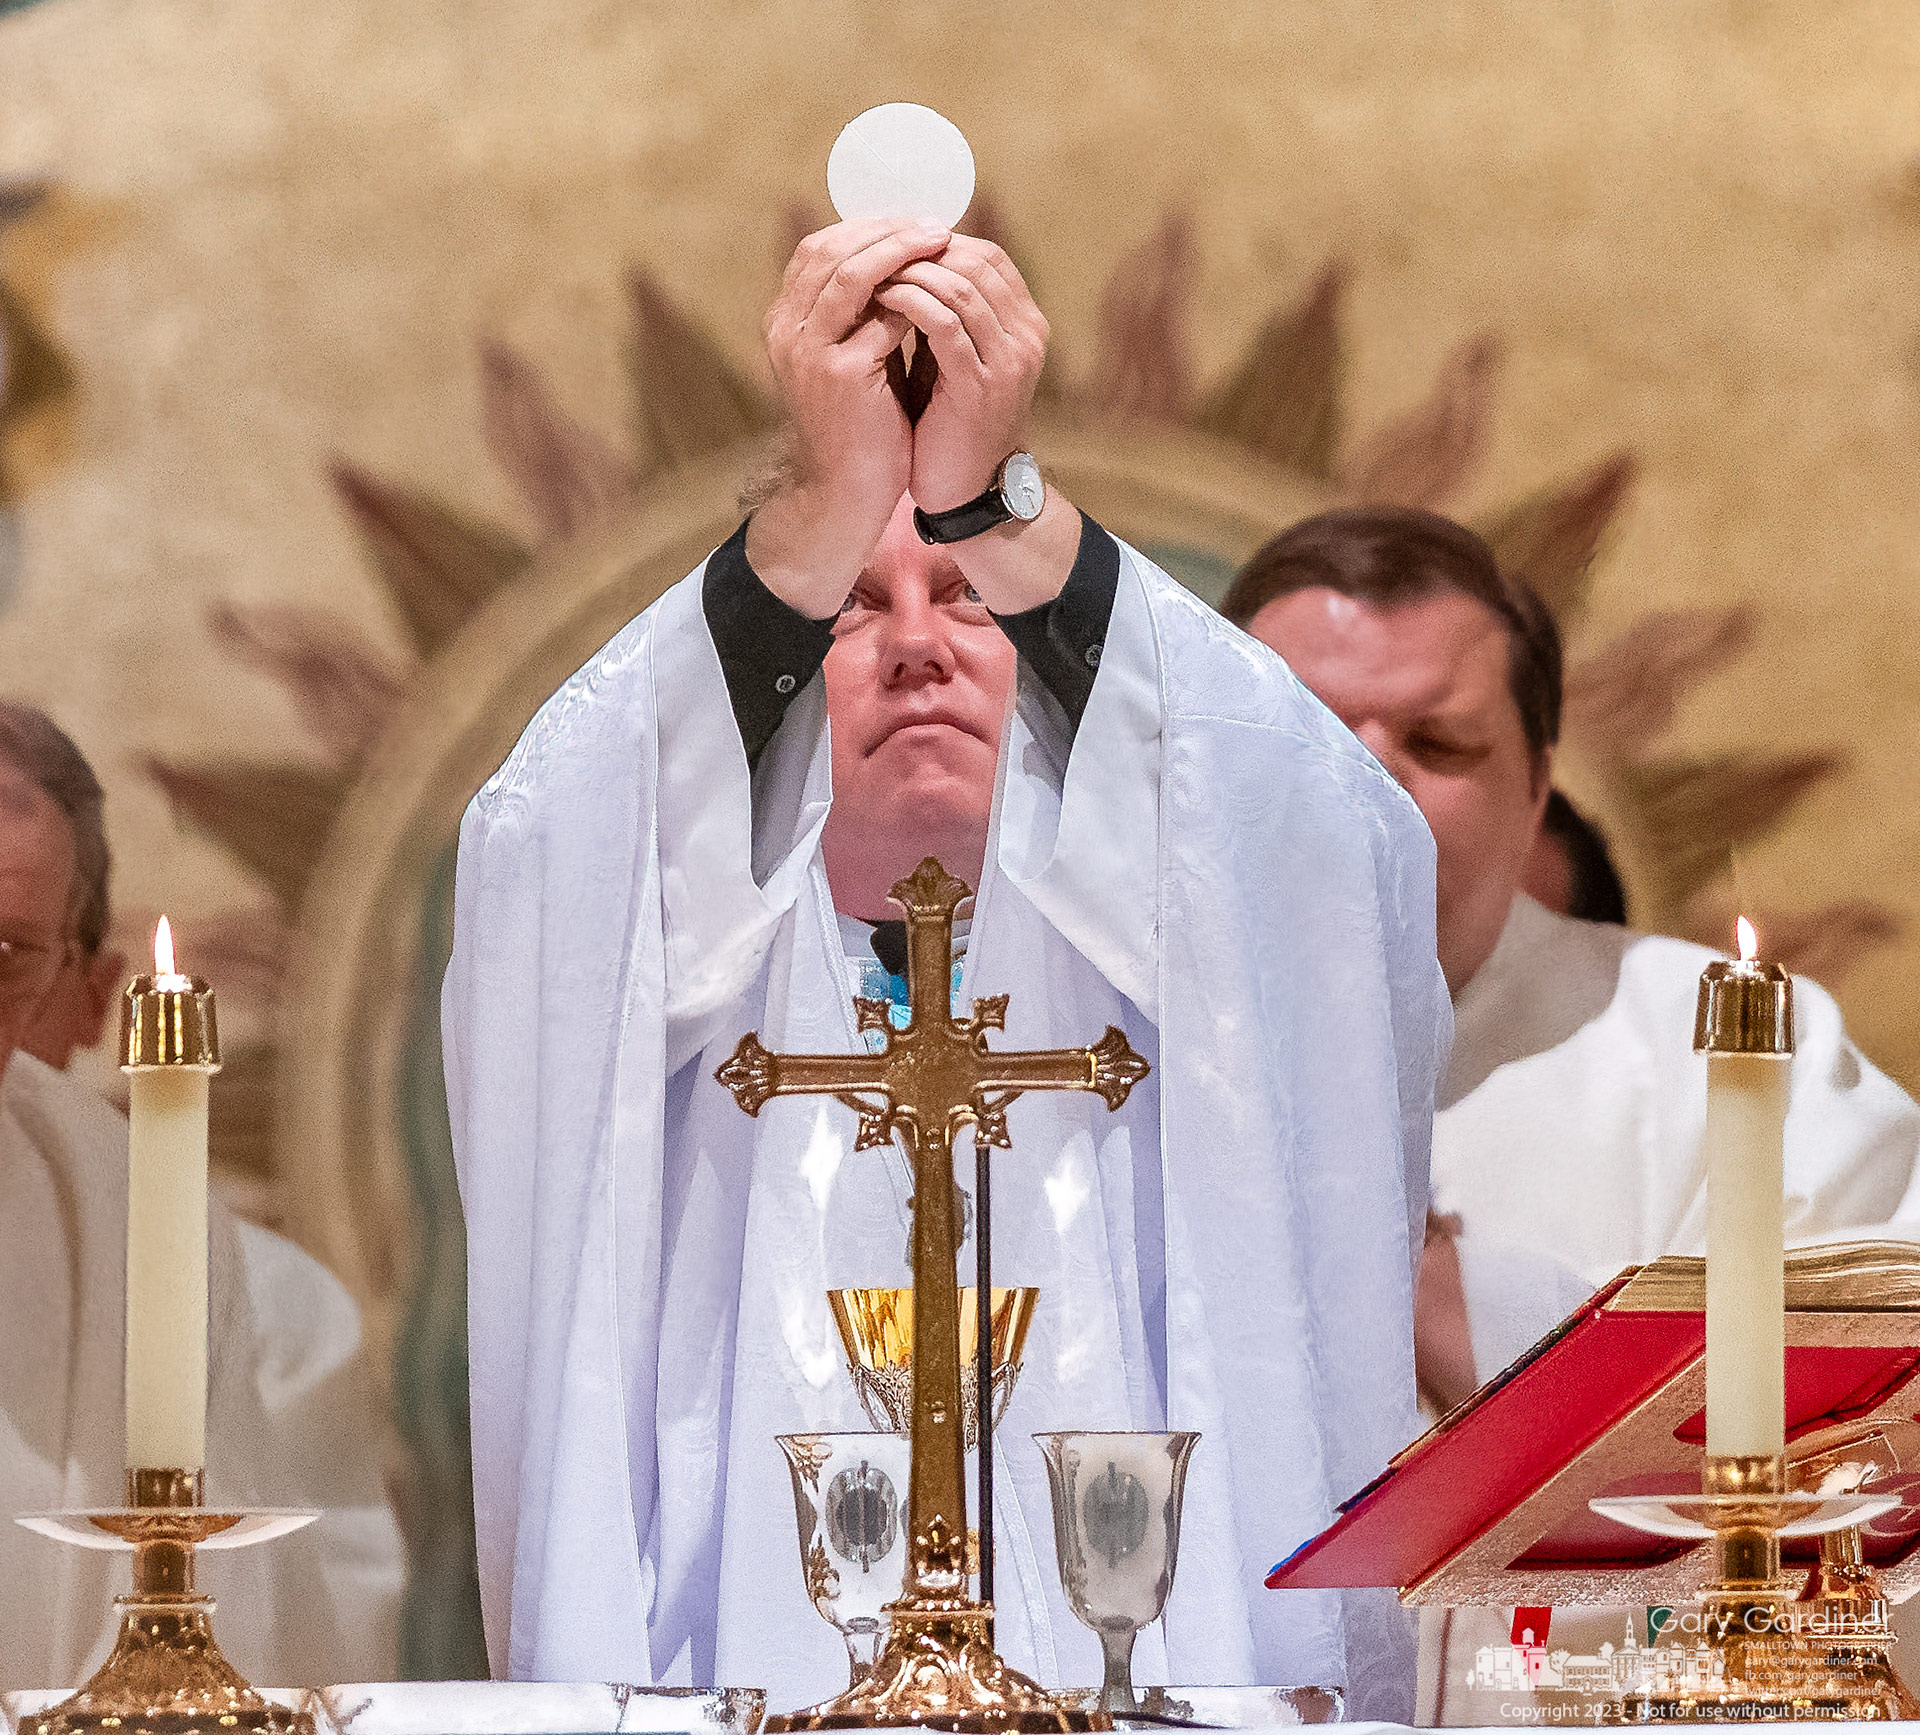 Fr. Jonathan Wilson raises a consecrated host during Mass at St. Paul the Apostle Catholic Church celebrating his serving 20 years as a priest. My Final Photo for May 31, 2023.